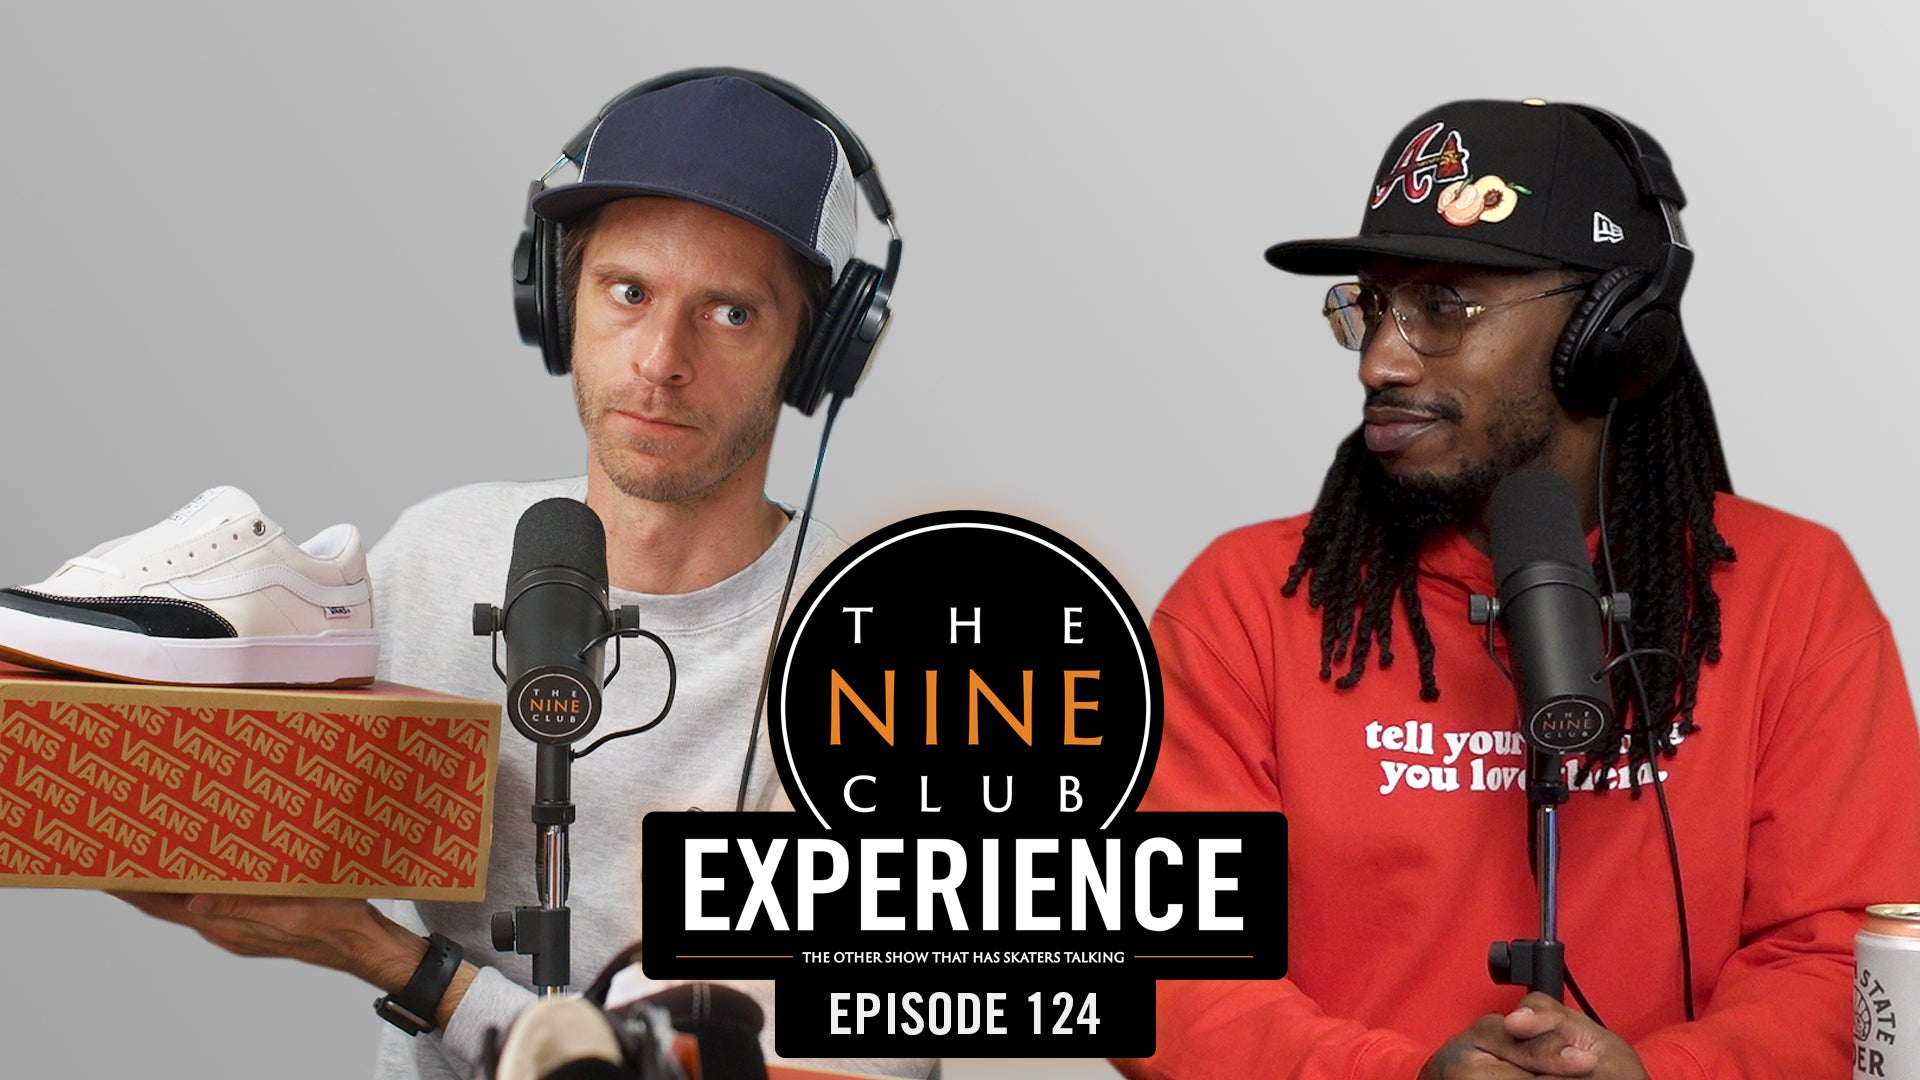 The Nine Club Experience Episode 124